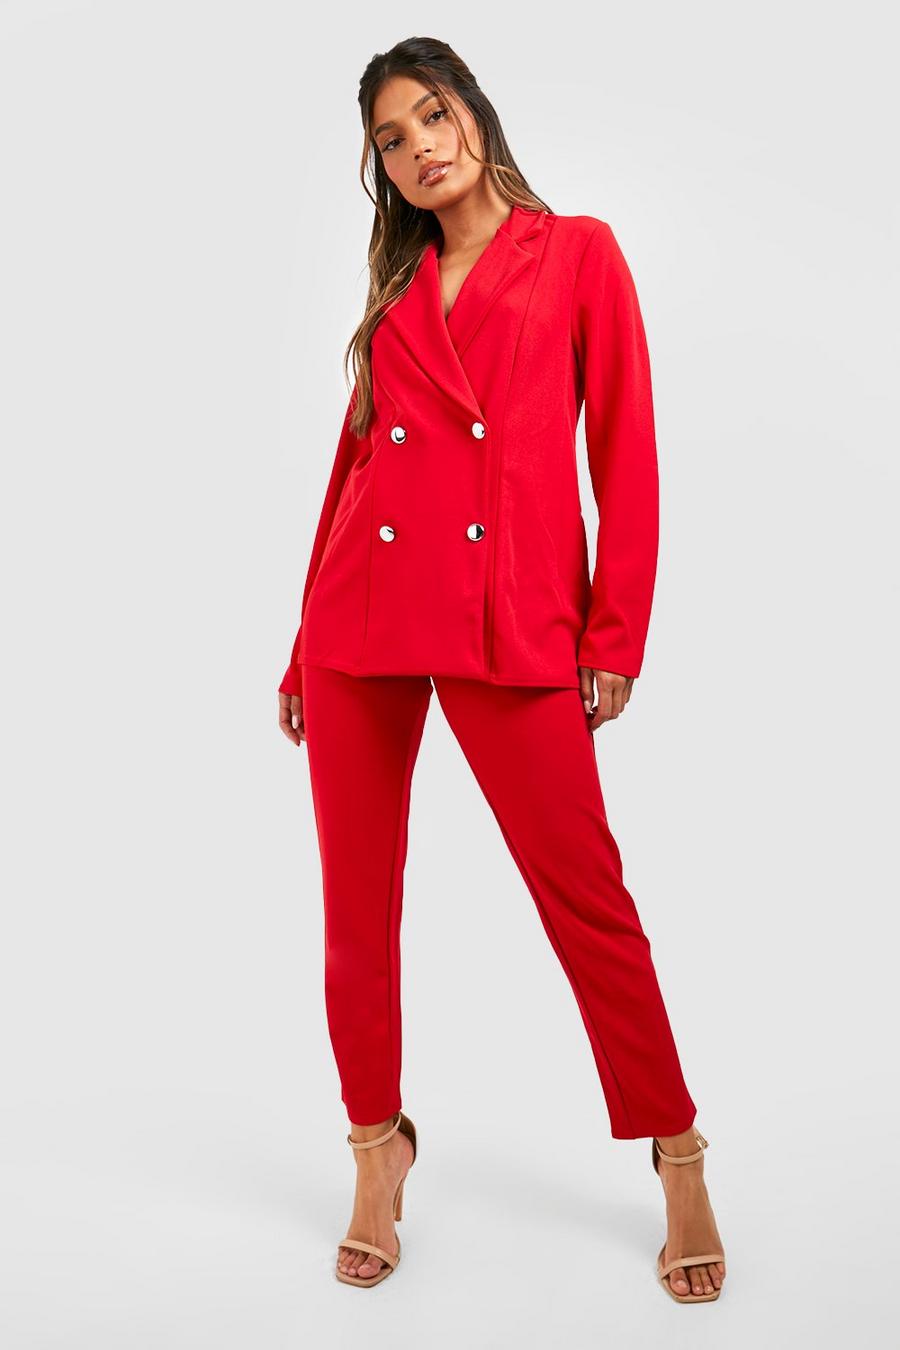 Red Double Breasted Blazer And Trouser Suit Set